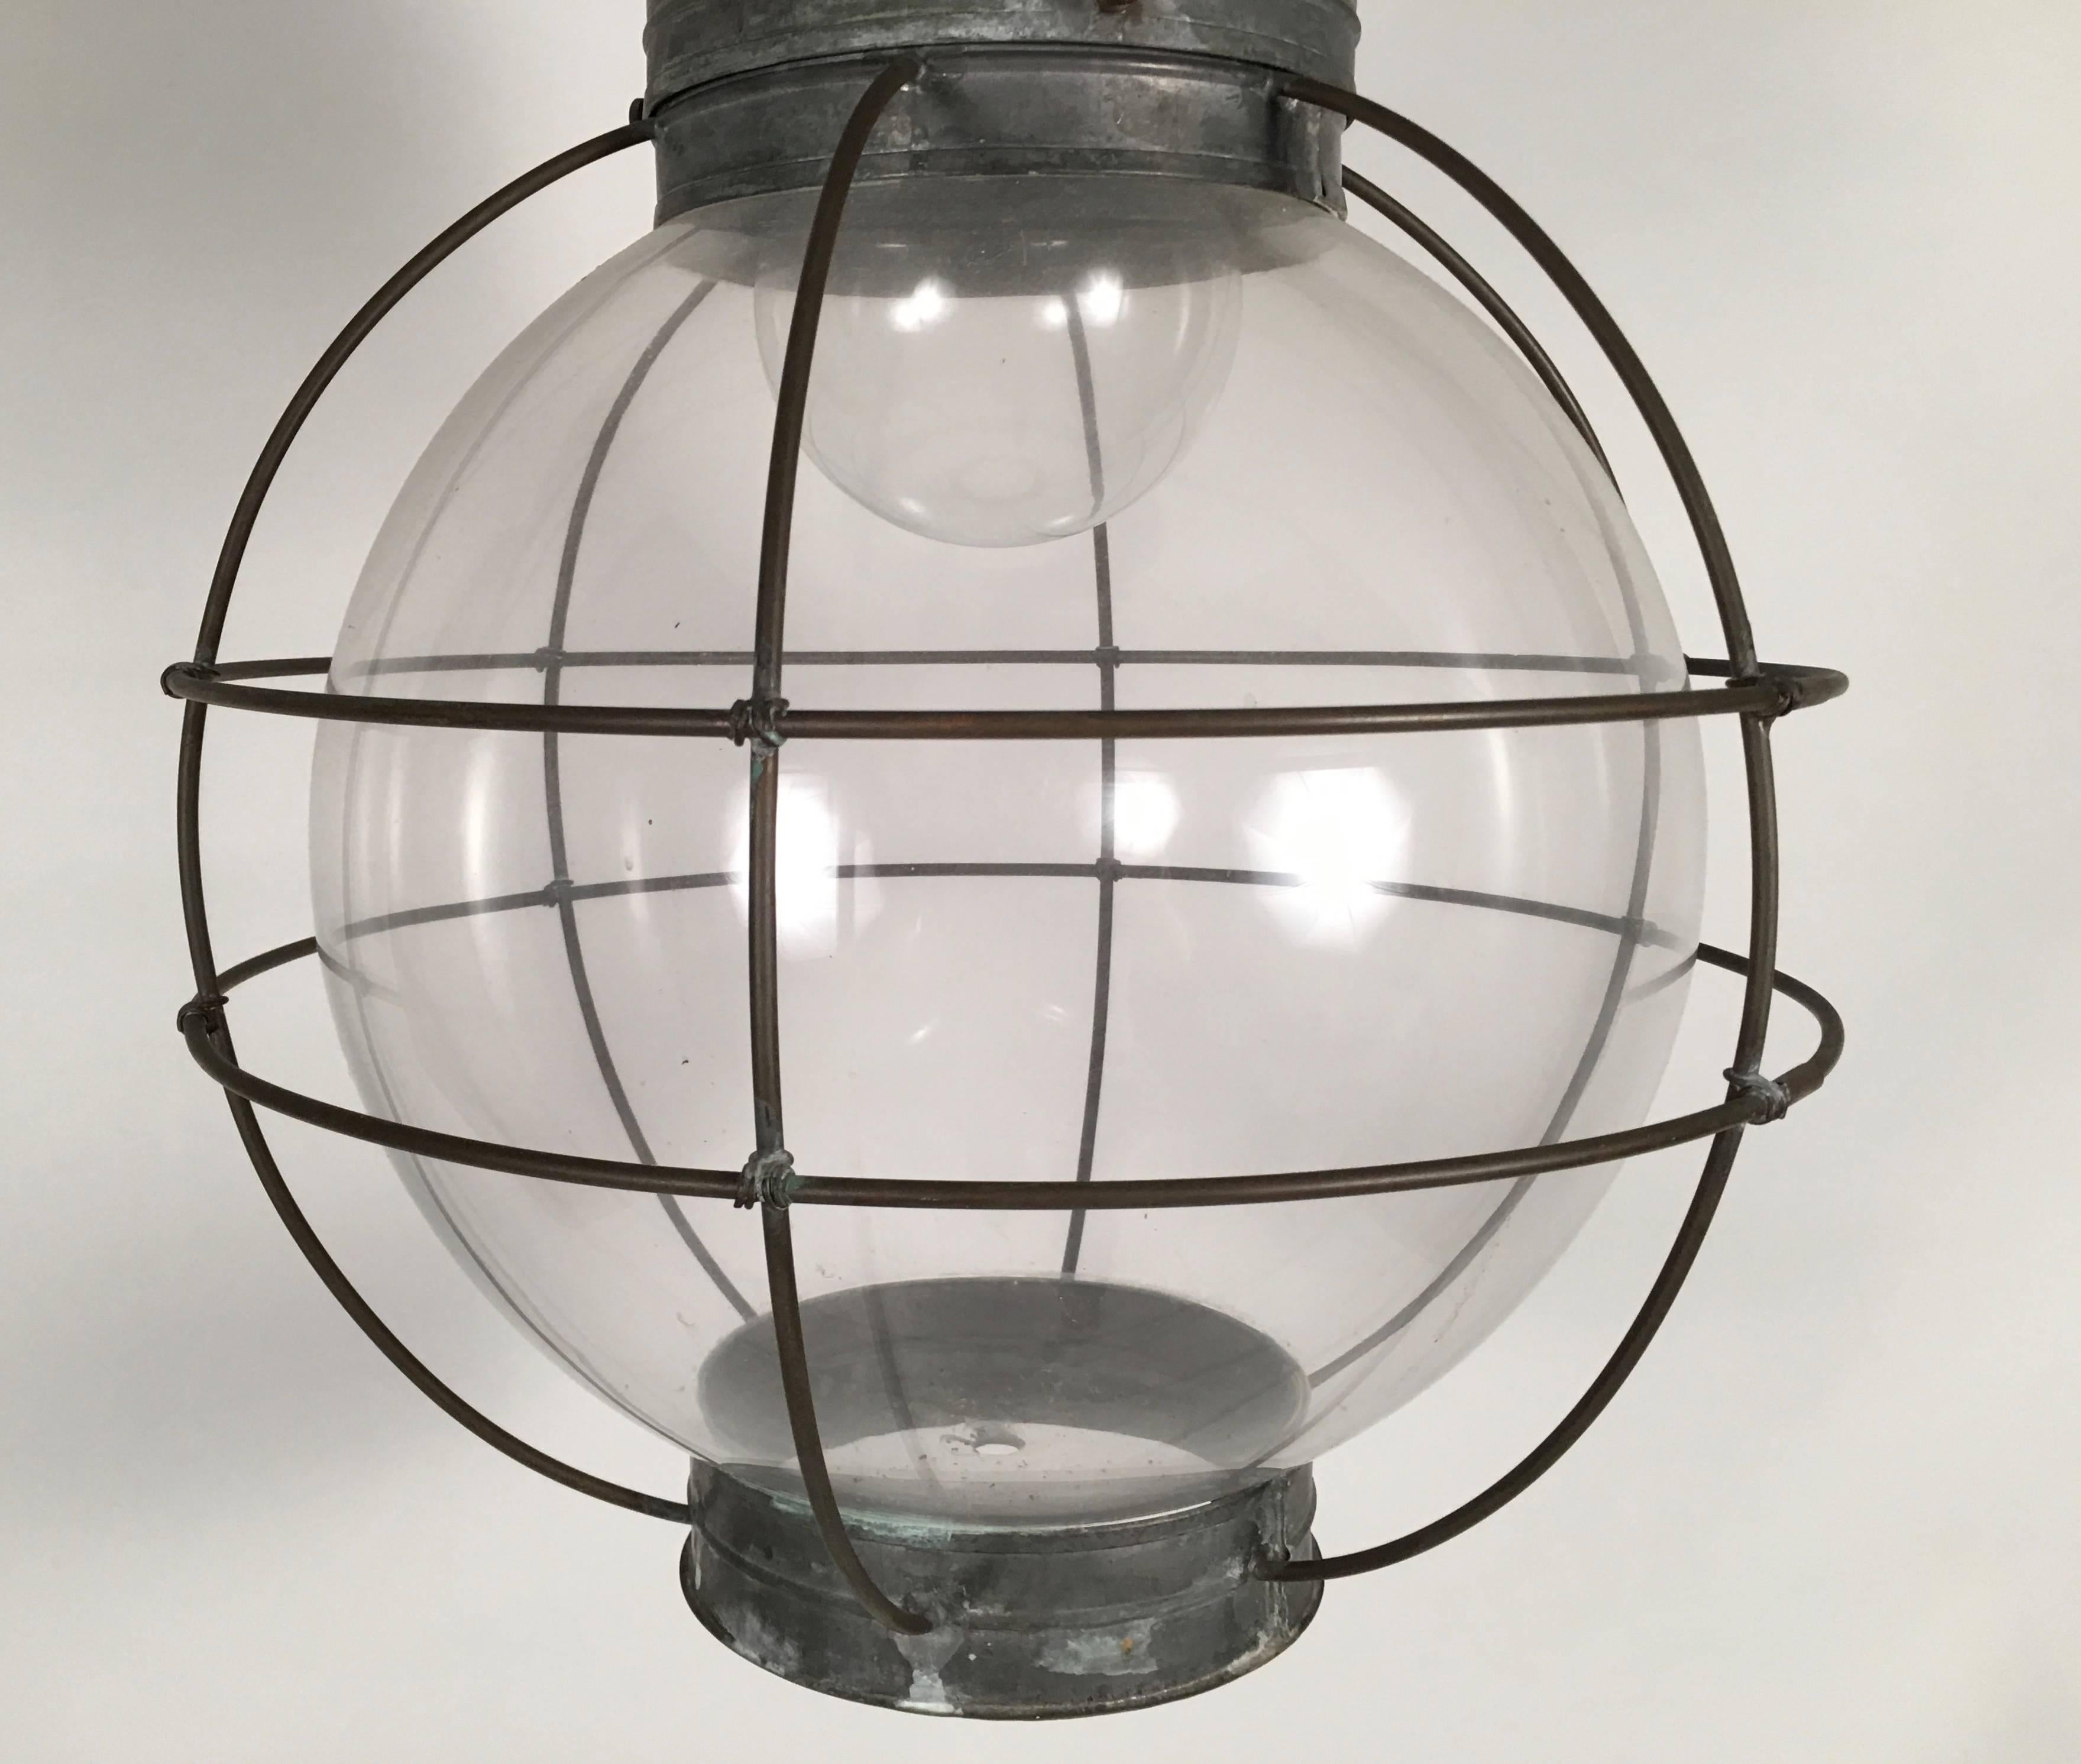 An unusual oversized nautical onion lantern in tin and blown glass, newly rewired, the conical tin roof over a tin collar punched with stars for venting heat, over a blown glass sphere within a tin cage to protect from breakage.

This form dates